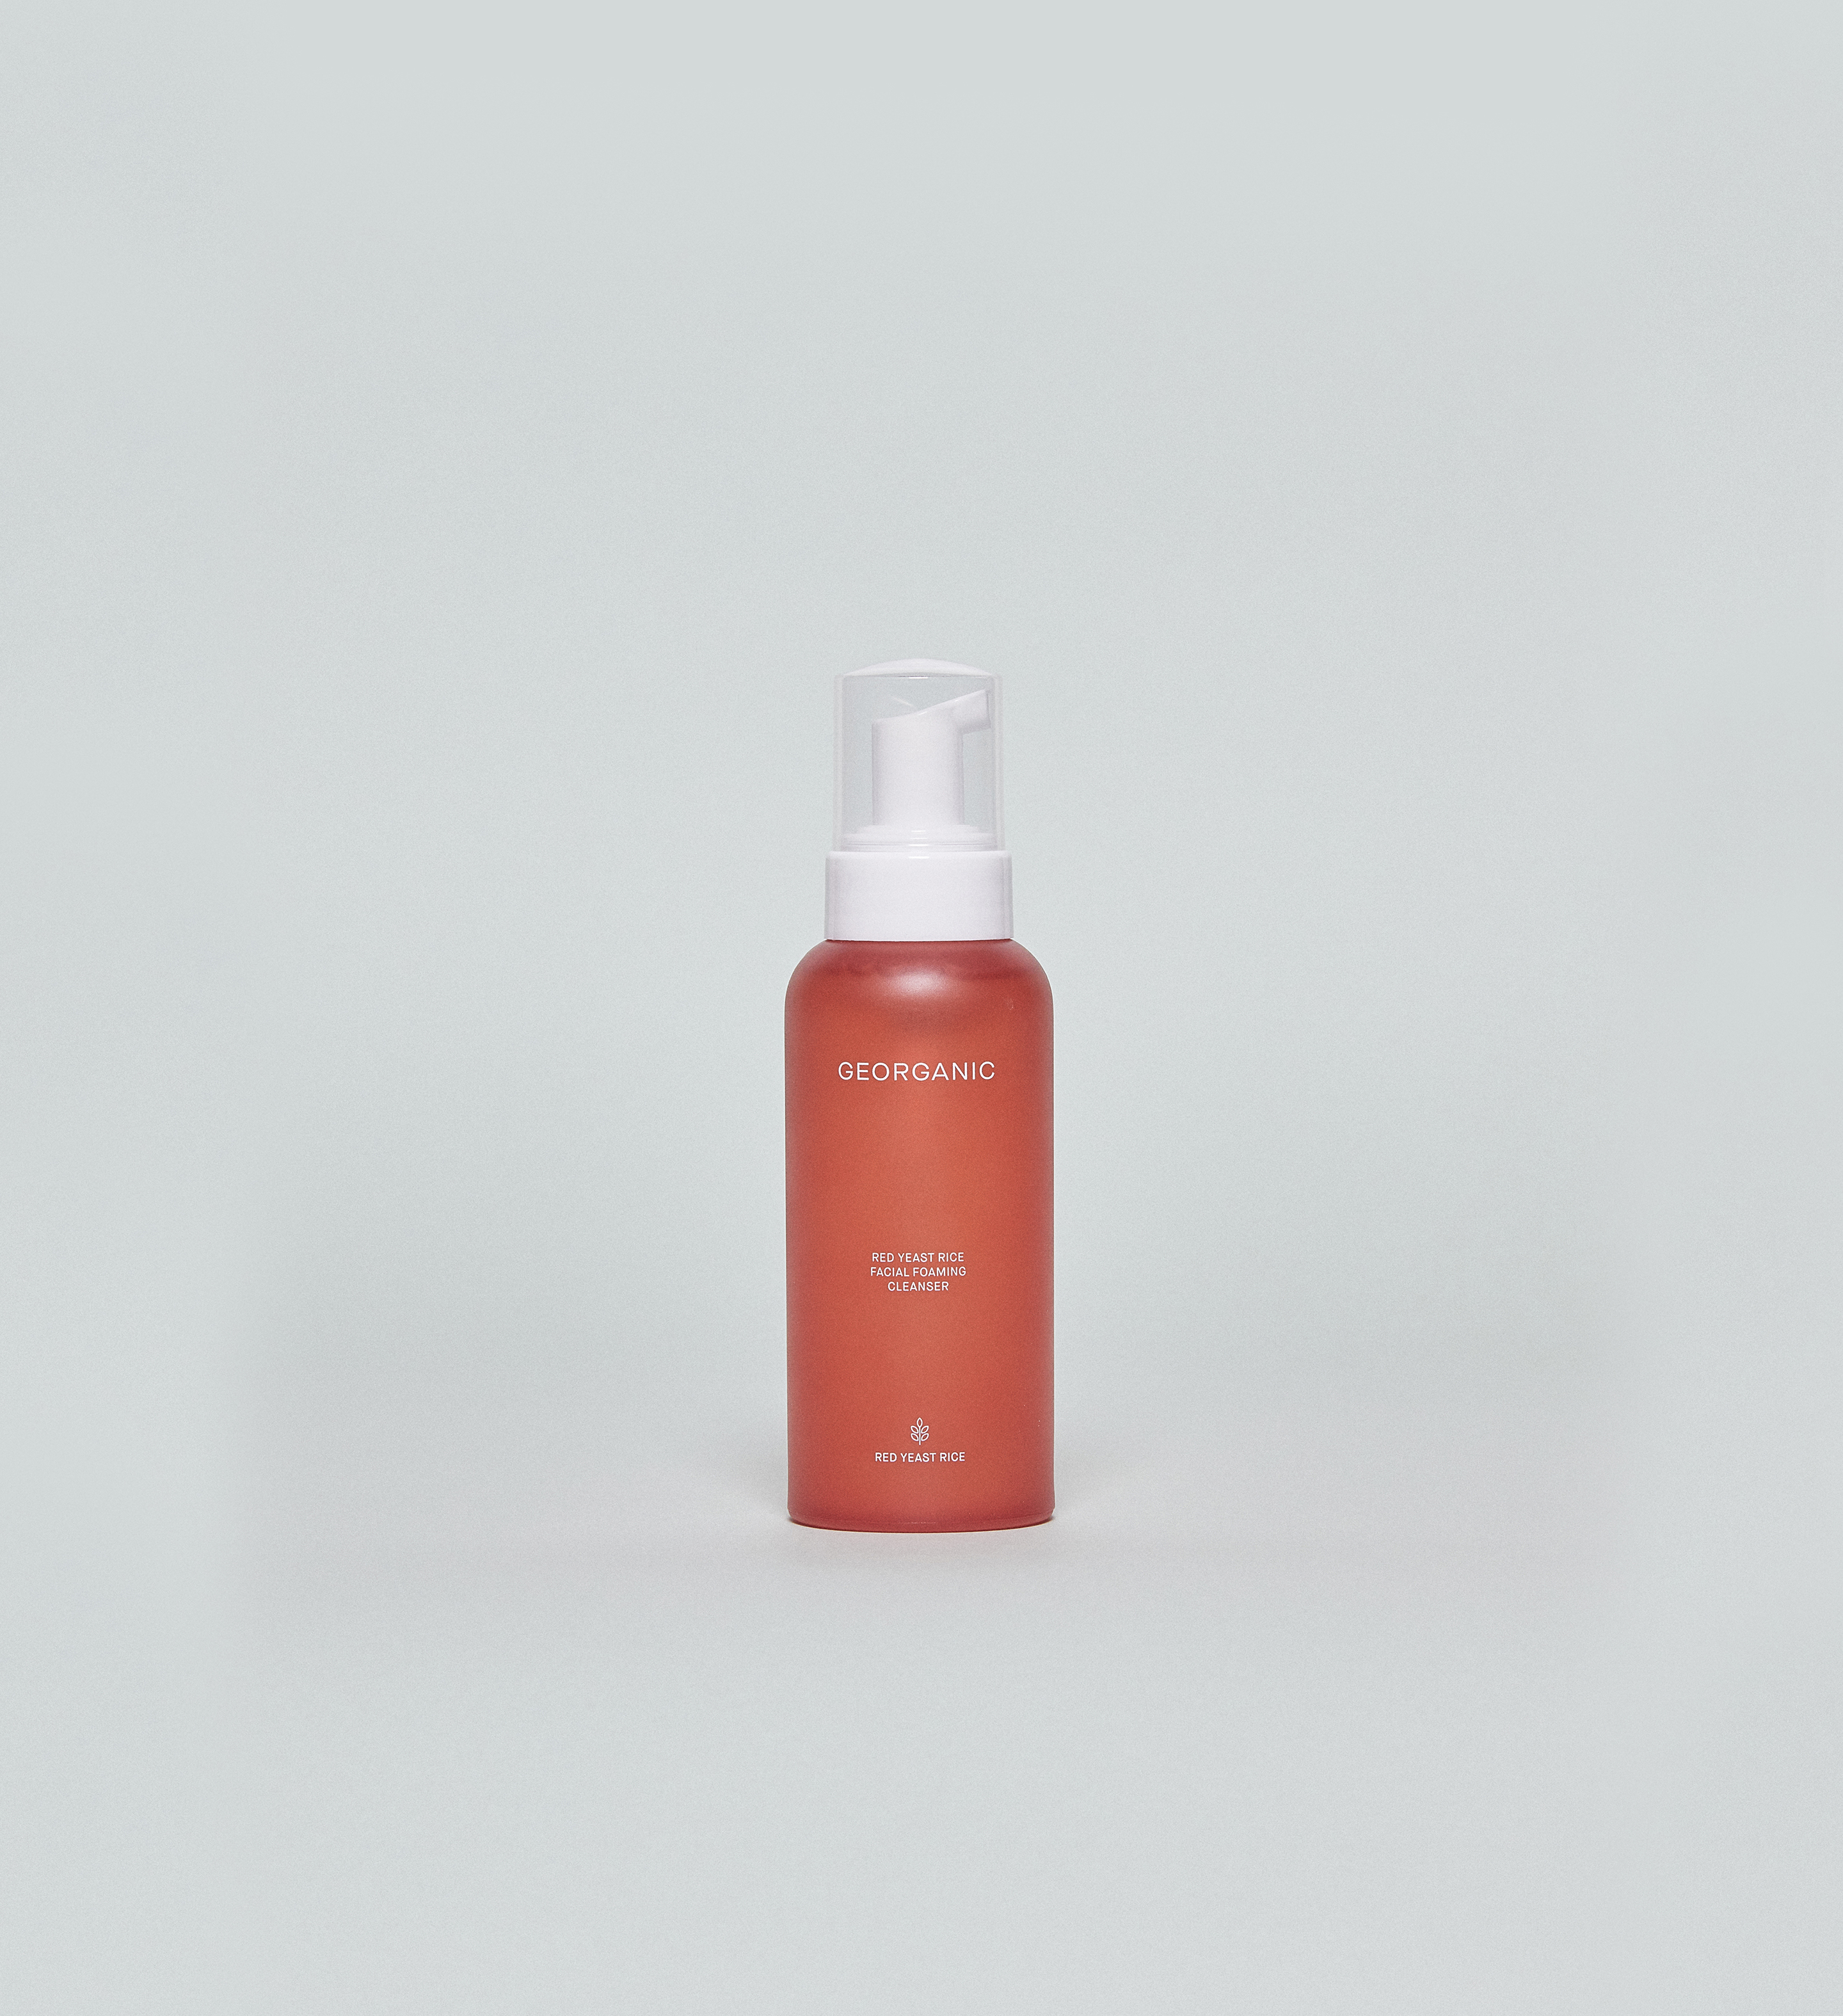 Georganic Red Yeast Rice Facial Foaming Cleanser